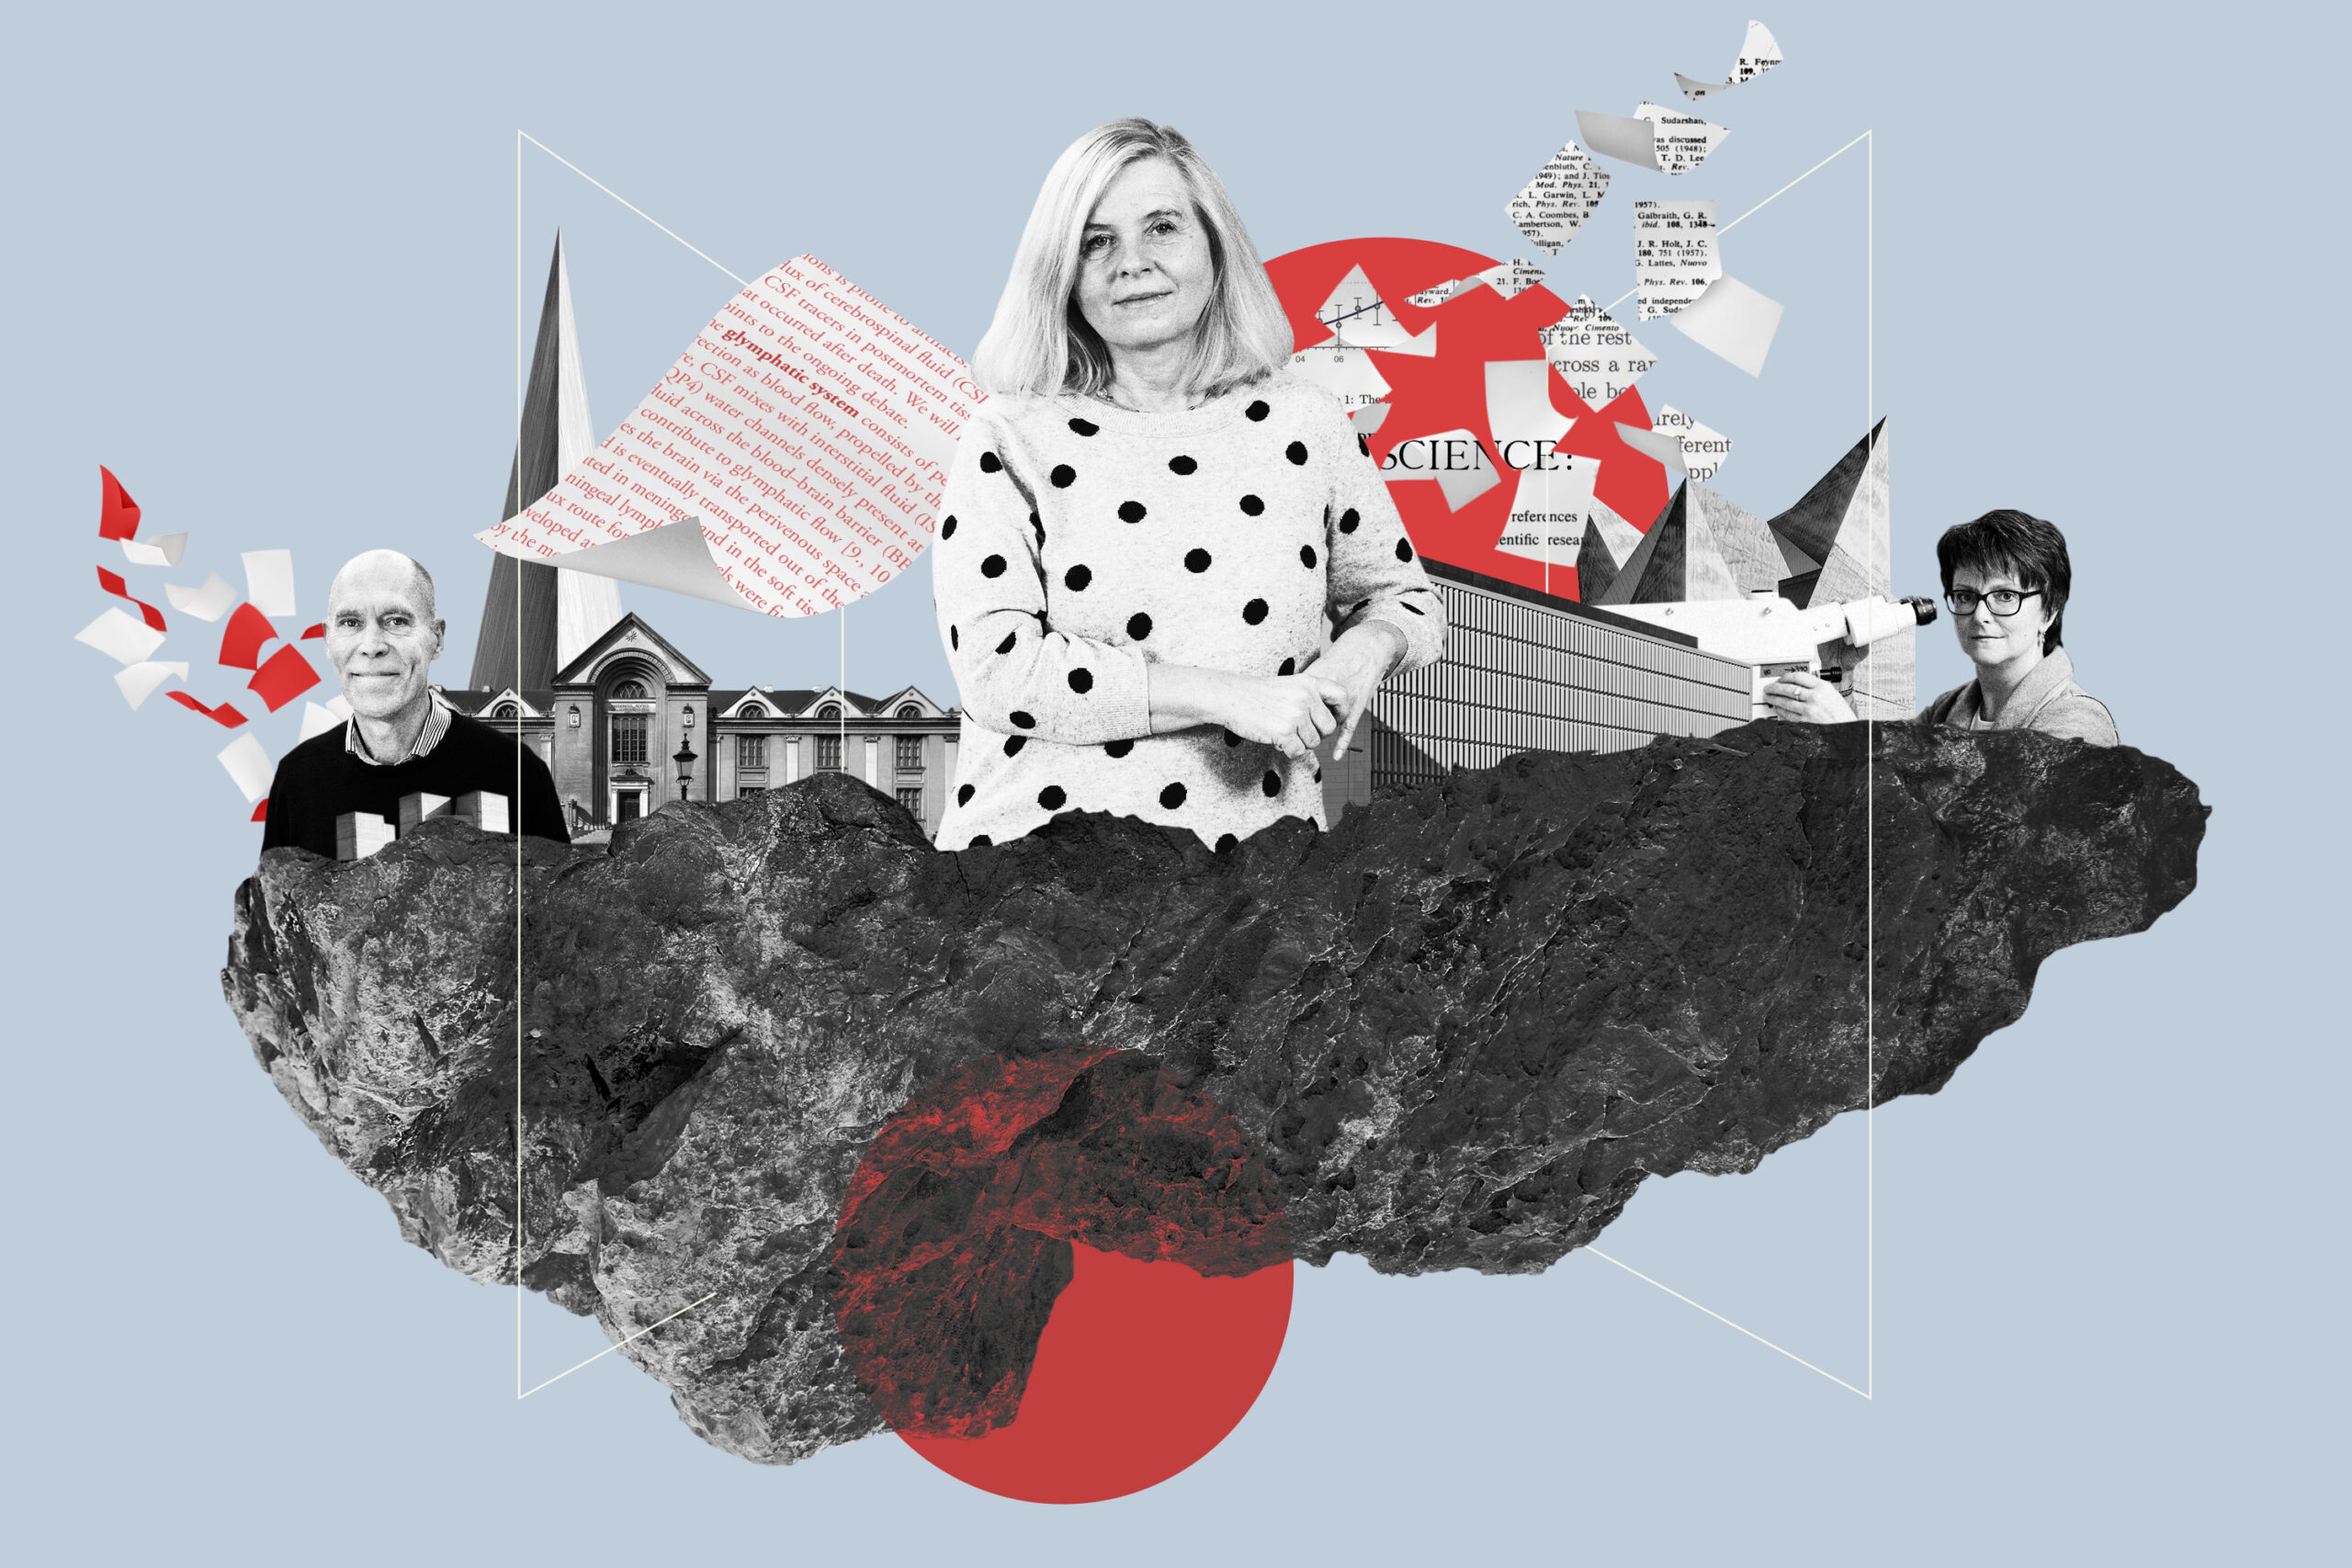 Maiken Nedergaard, Britta Engelhardt and Christer Betsholtz on a floating rock island with university facilities and abstract shapes.